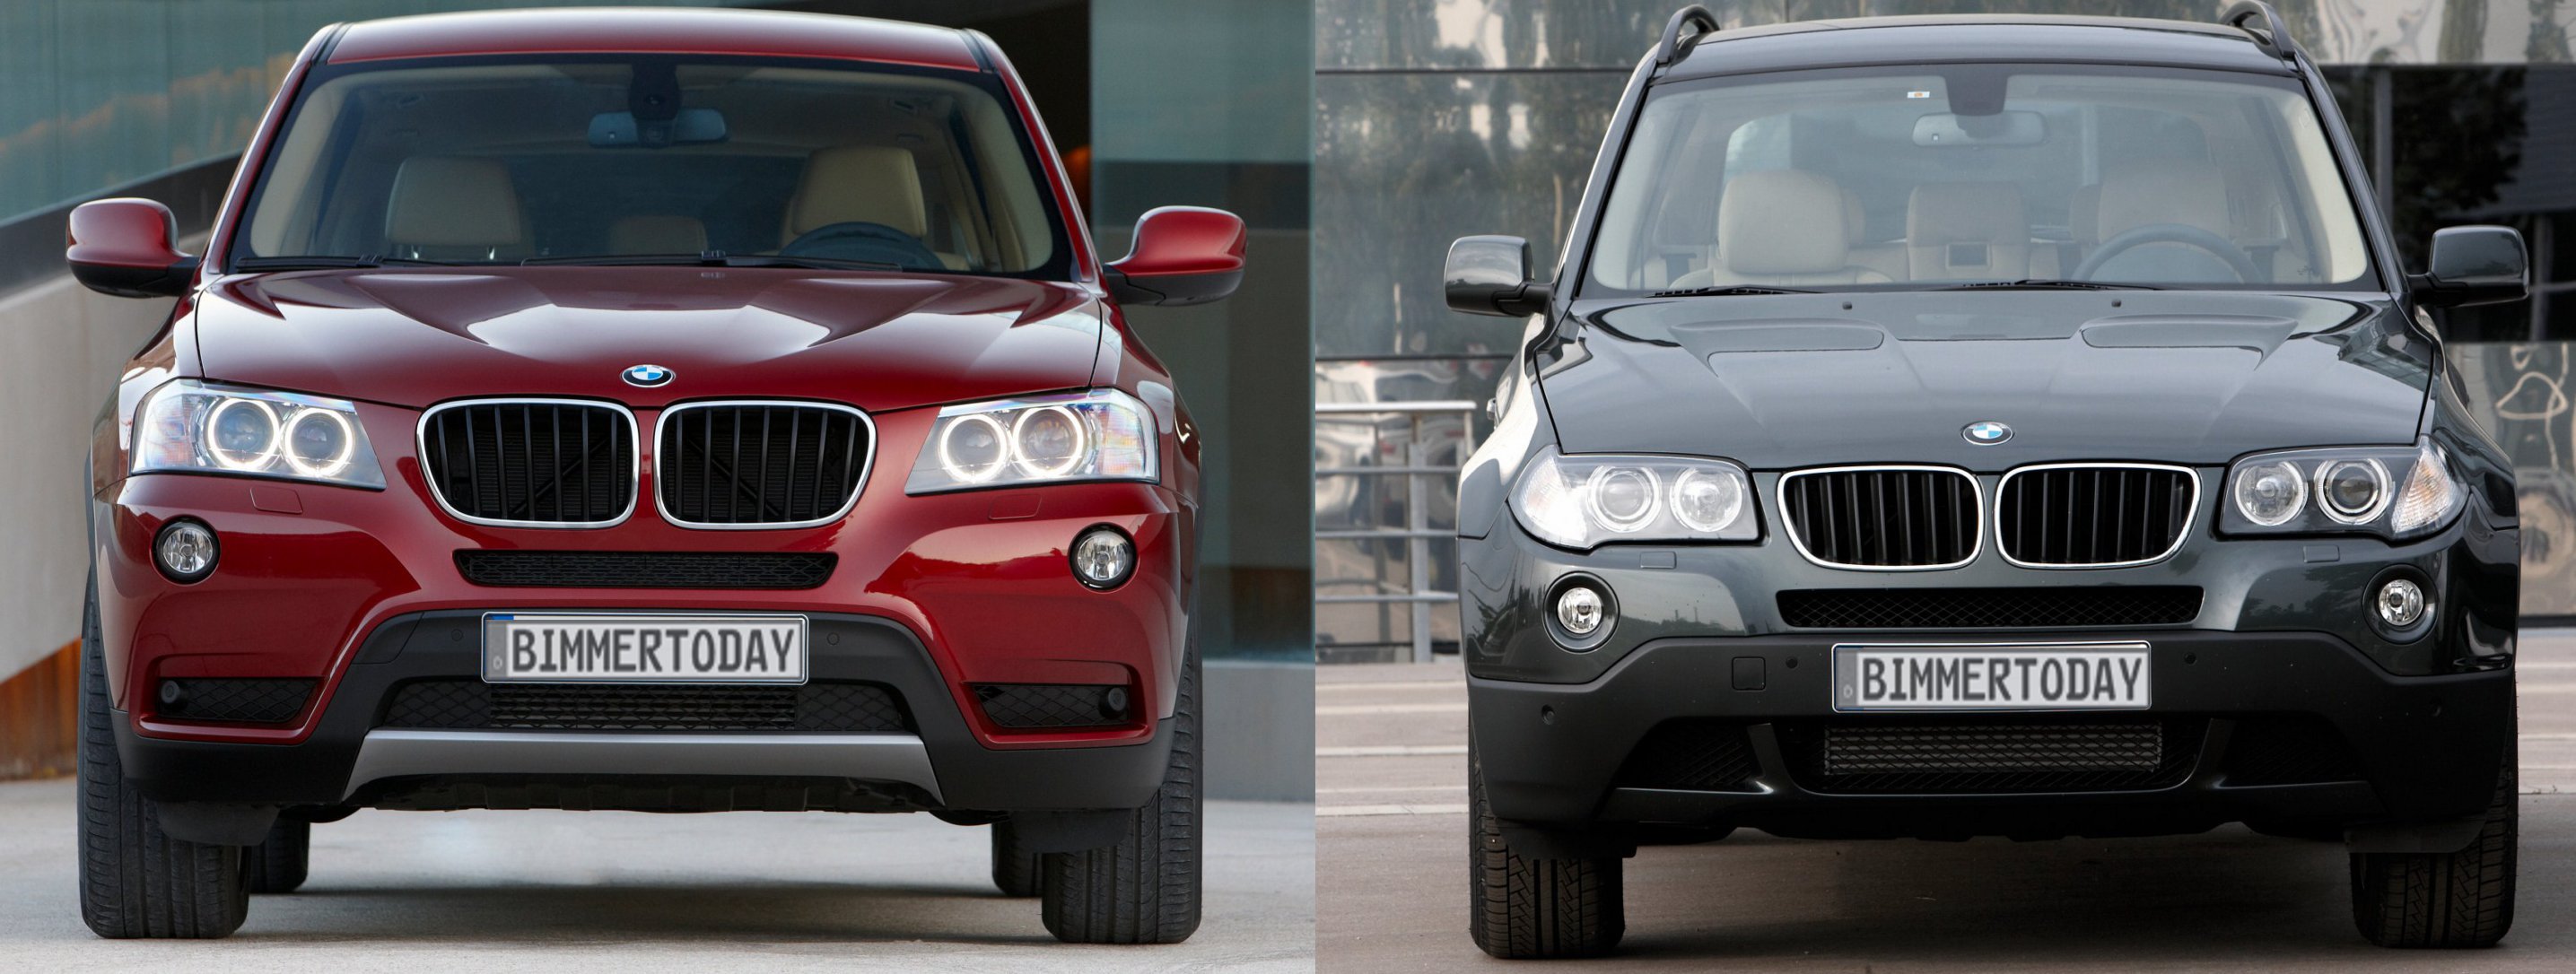 Whats better bmw x5 or x3 #3